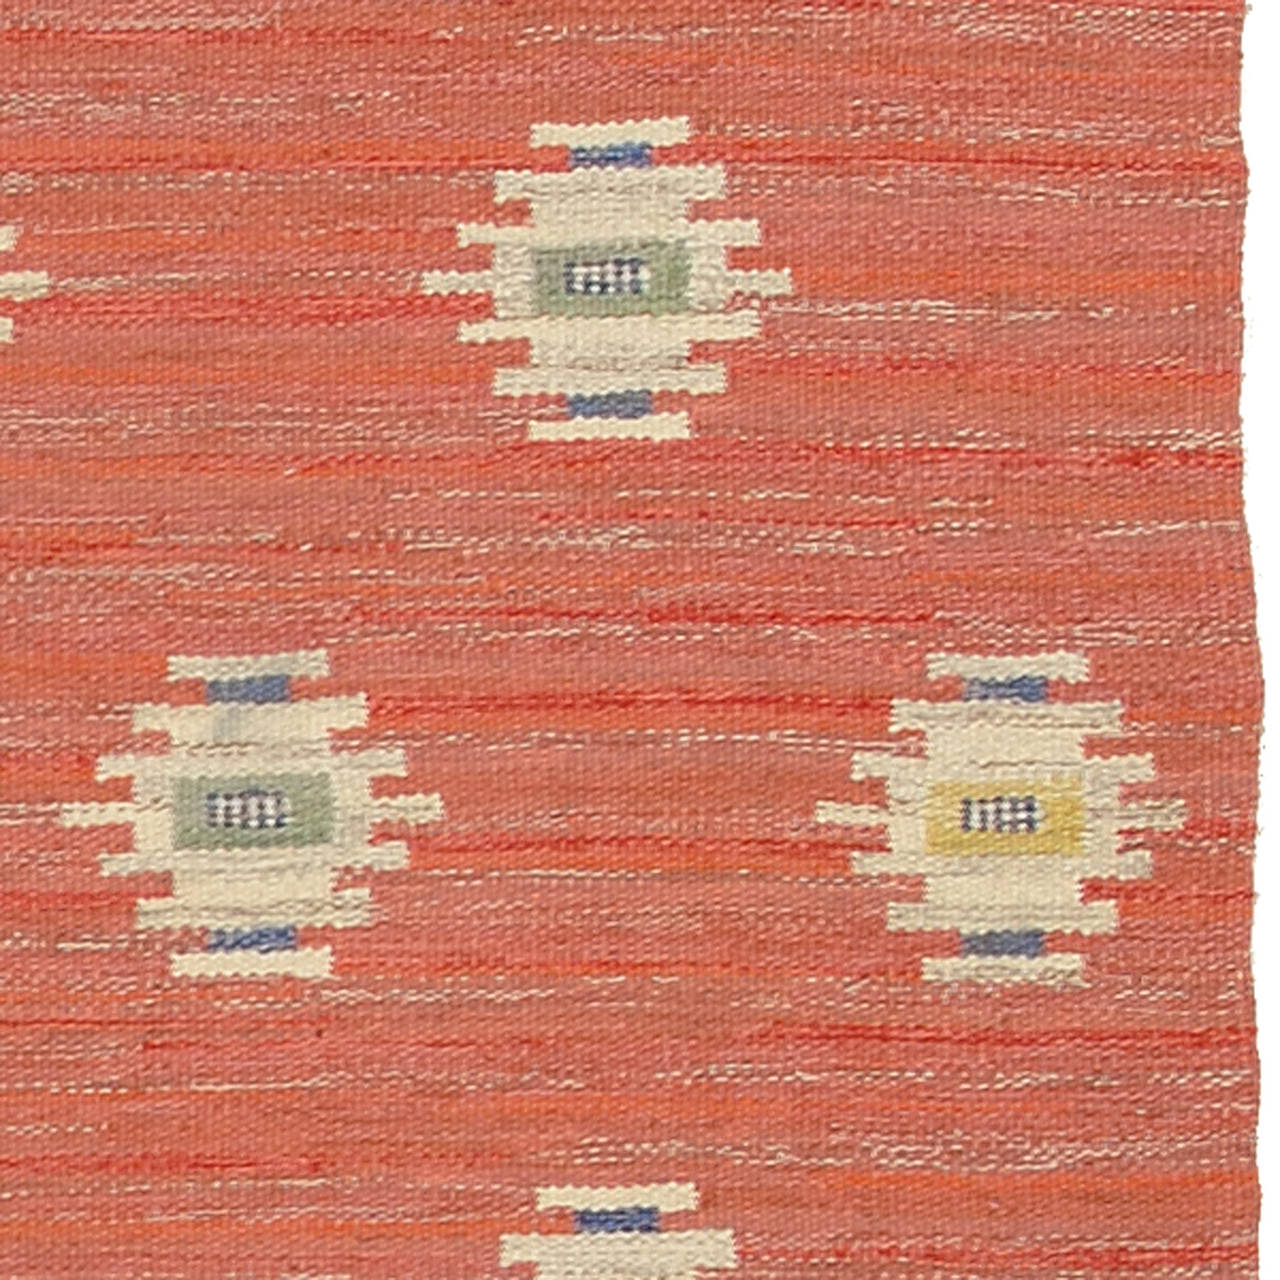 Mid 20th Century Swedish Flat-Weave Carpet In Excellent Condition For Sale In New York, NY